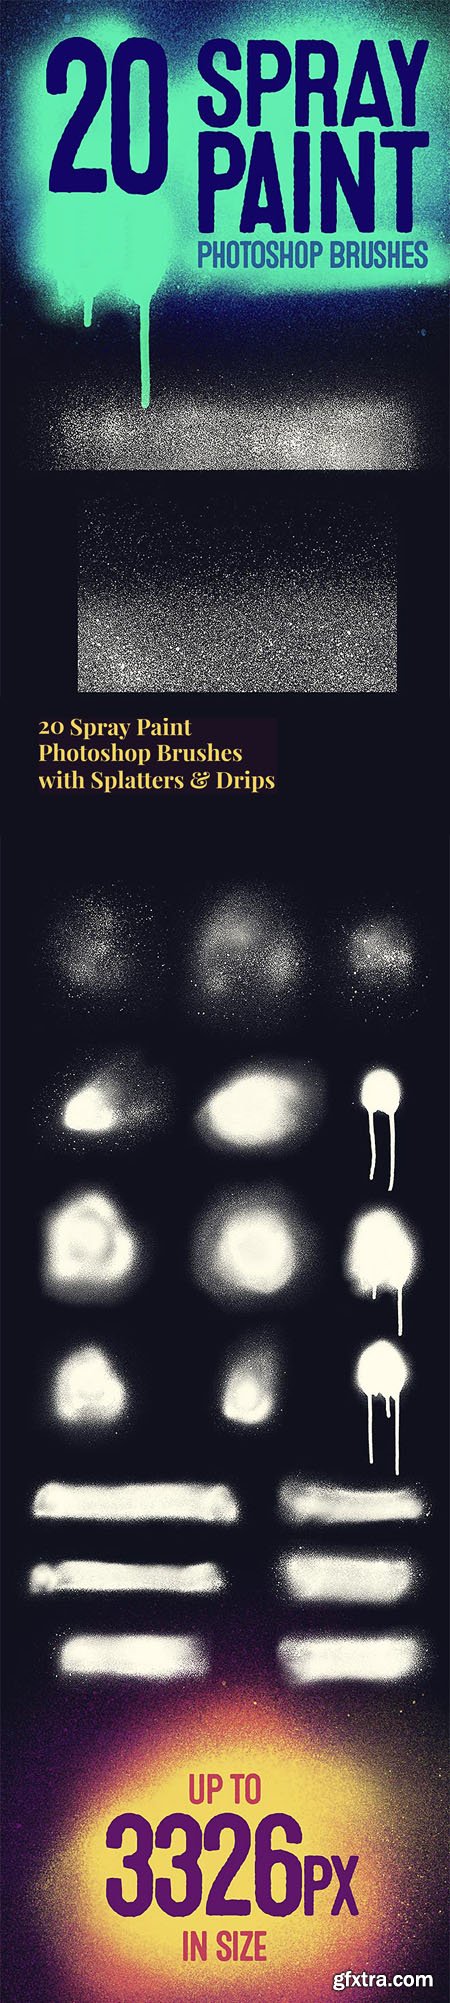 20 Spray Paint Brushes for Photoshop with Splatters & Drips